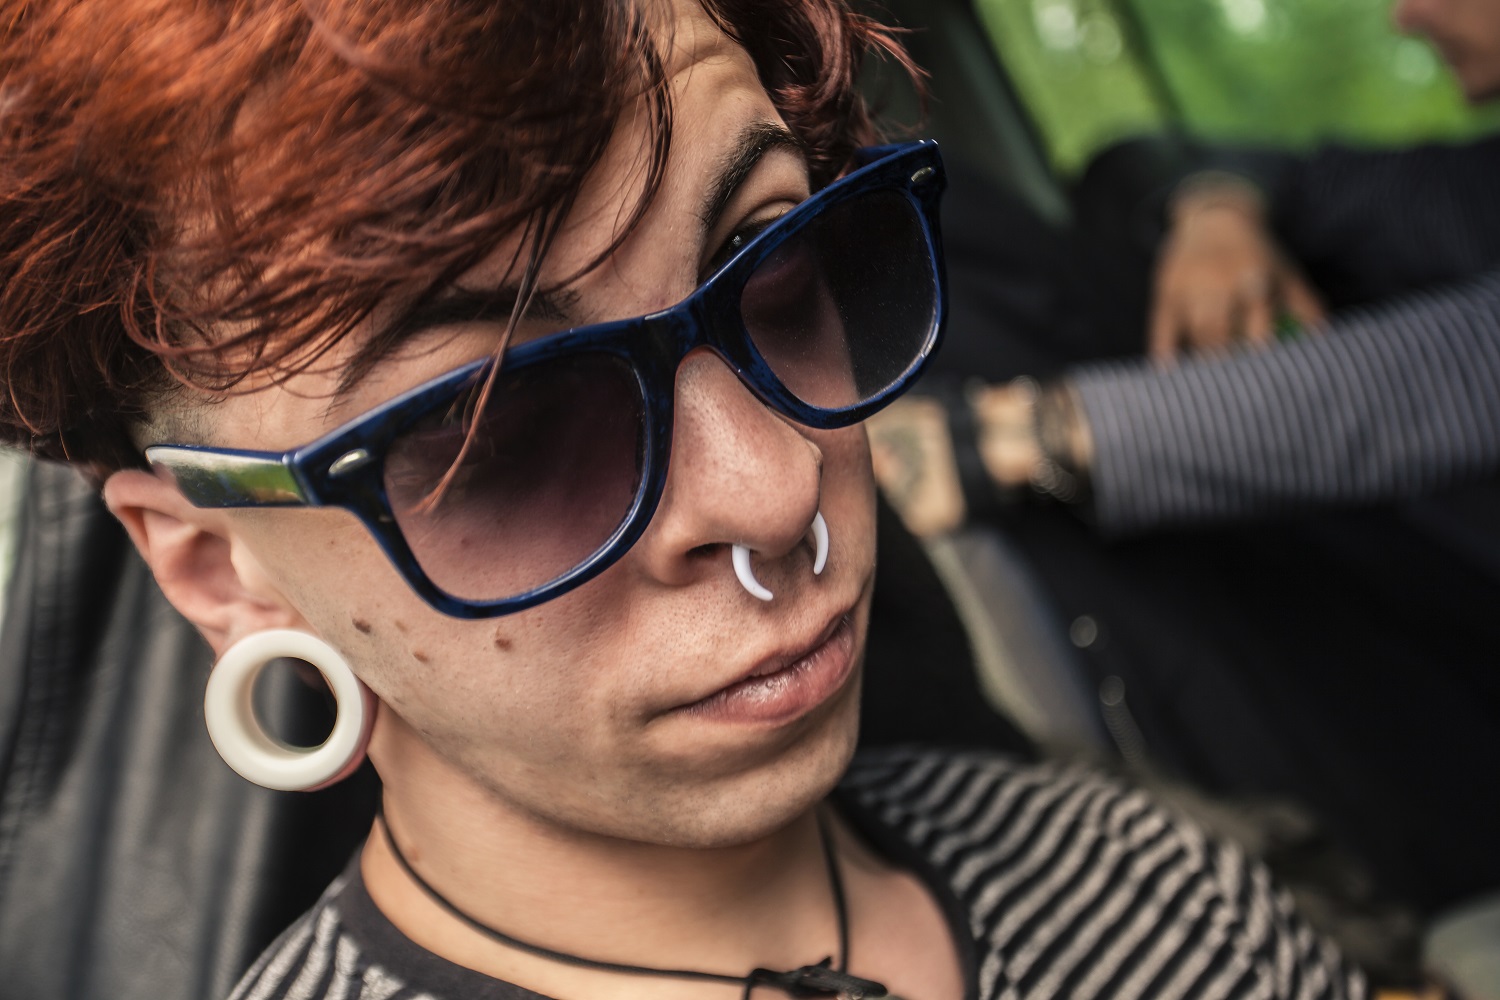 Do you want to get stretched ears?